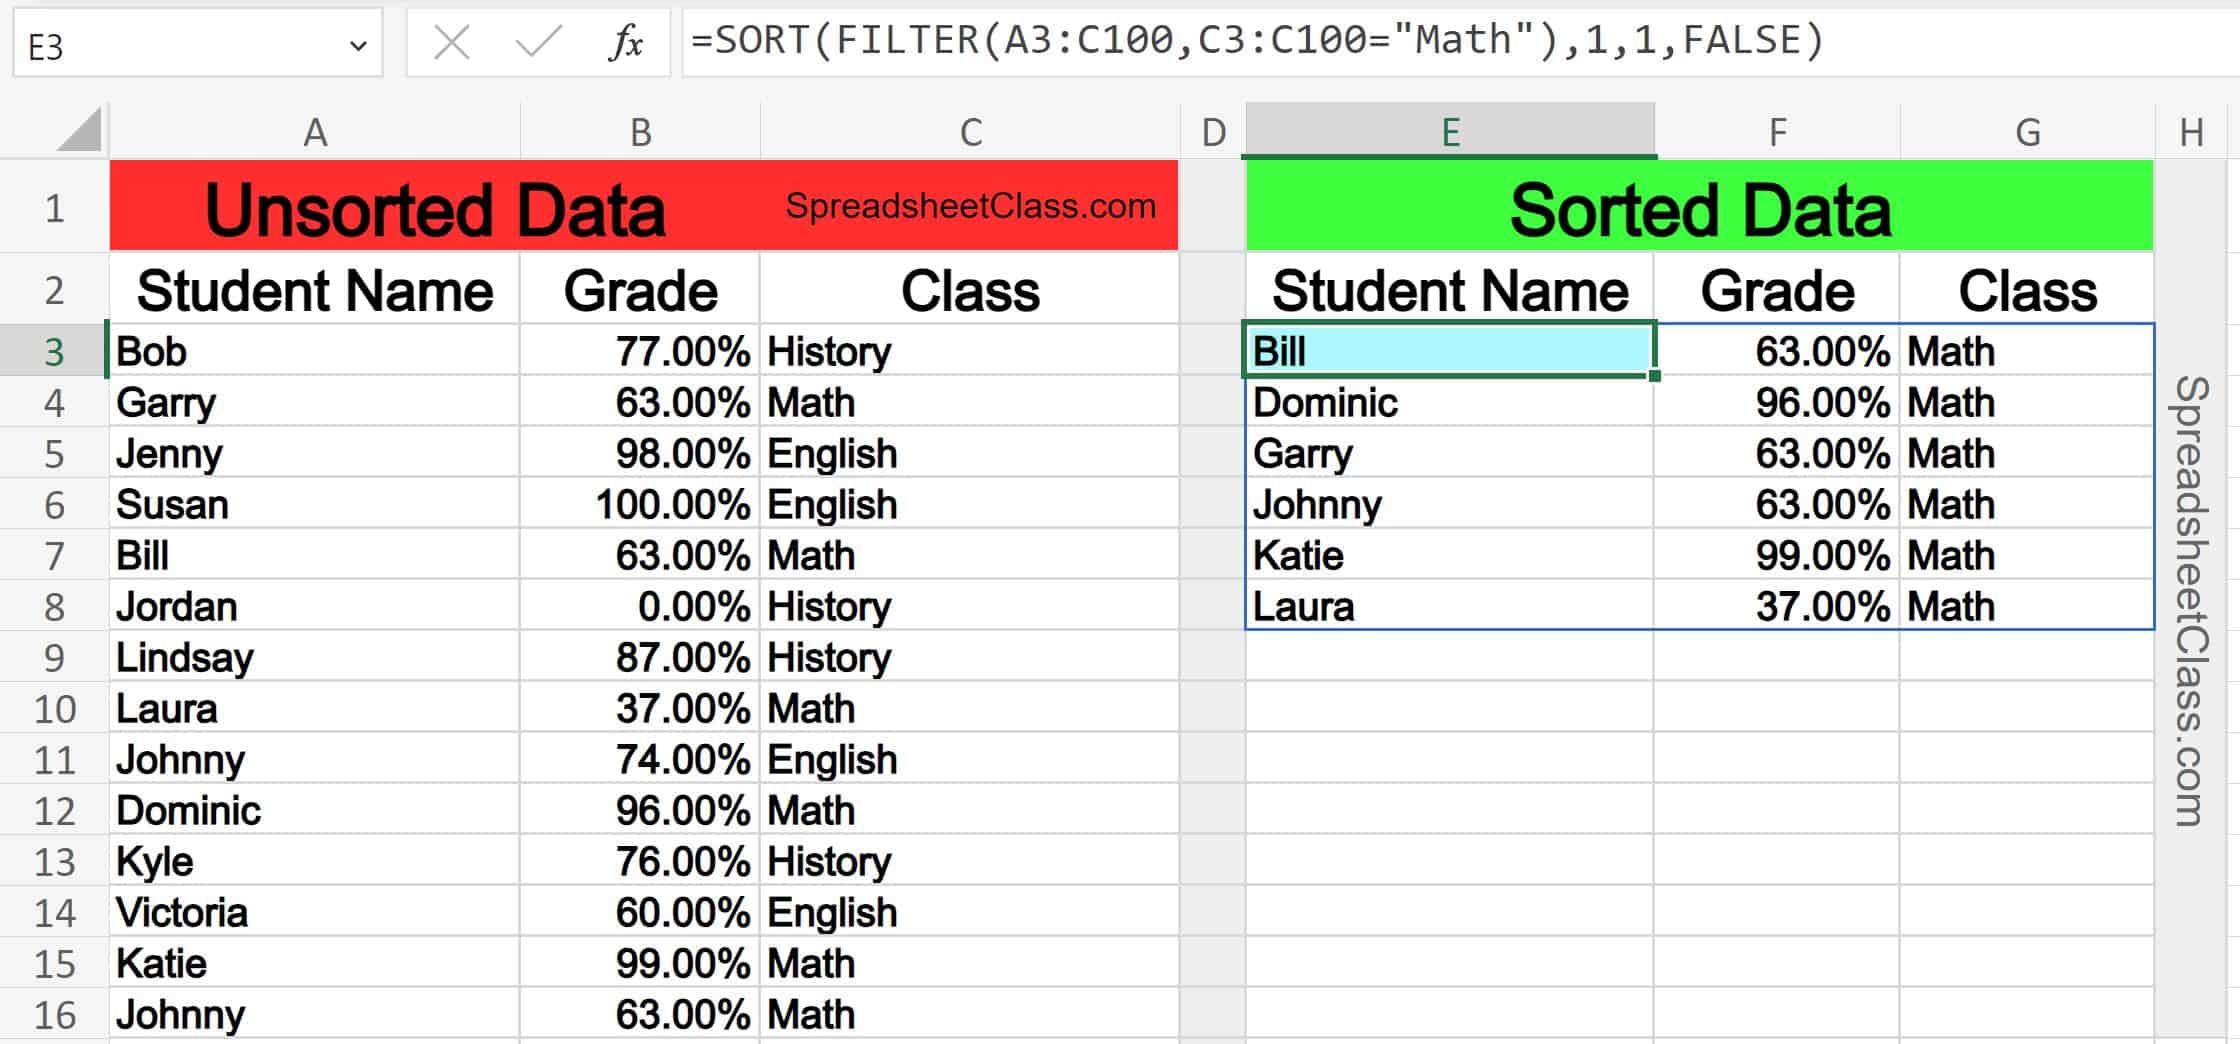 Example of the Excel SORT FILTER nested formula spreadsheetclass.com